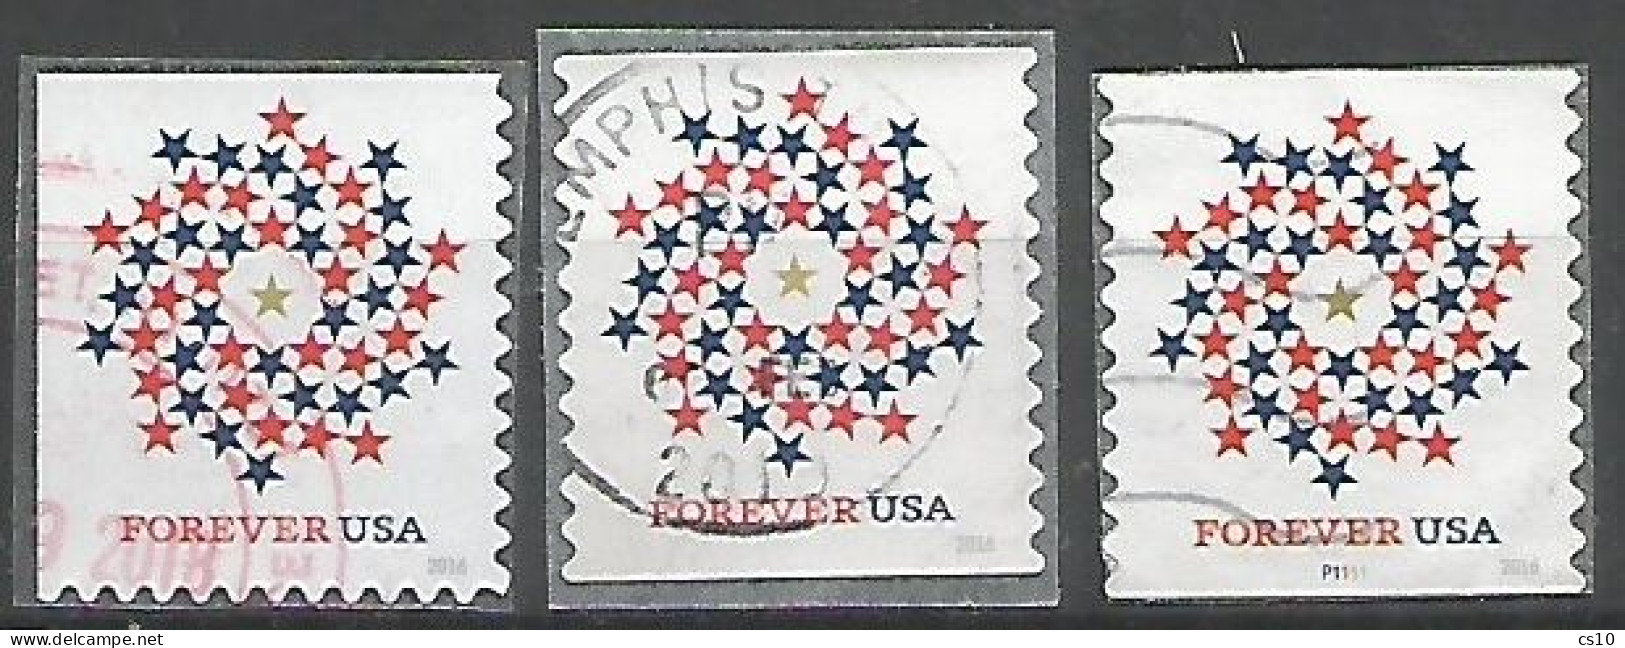 USA 2016 Patriotic Spiral Cpl 3v Issue SC. # 5130 Coil + # 5130a Coil Plate Number + #  5130 Booklet - Coils & Coil Singles